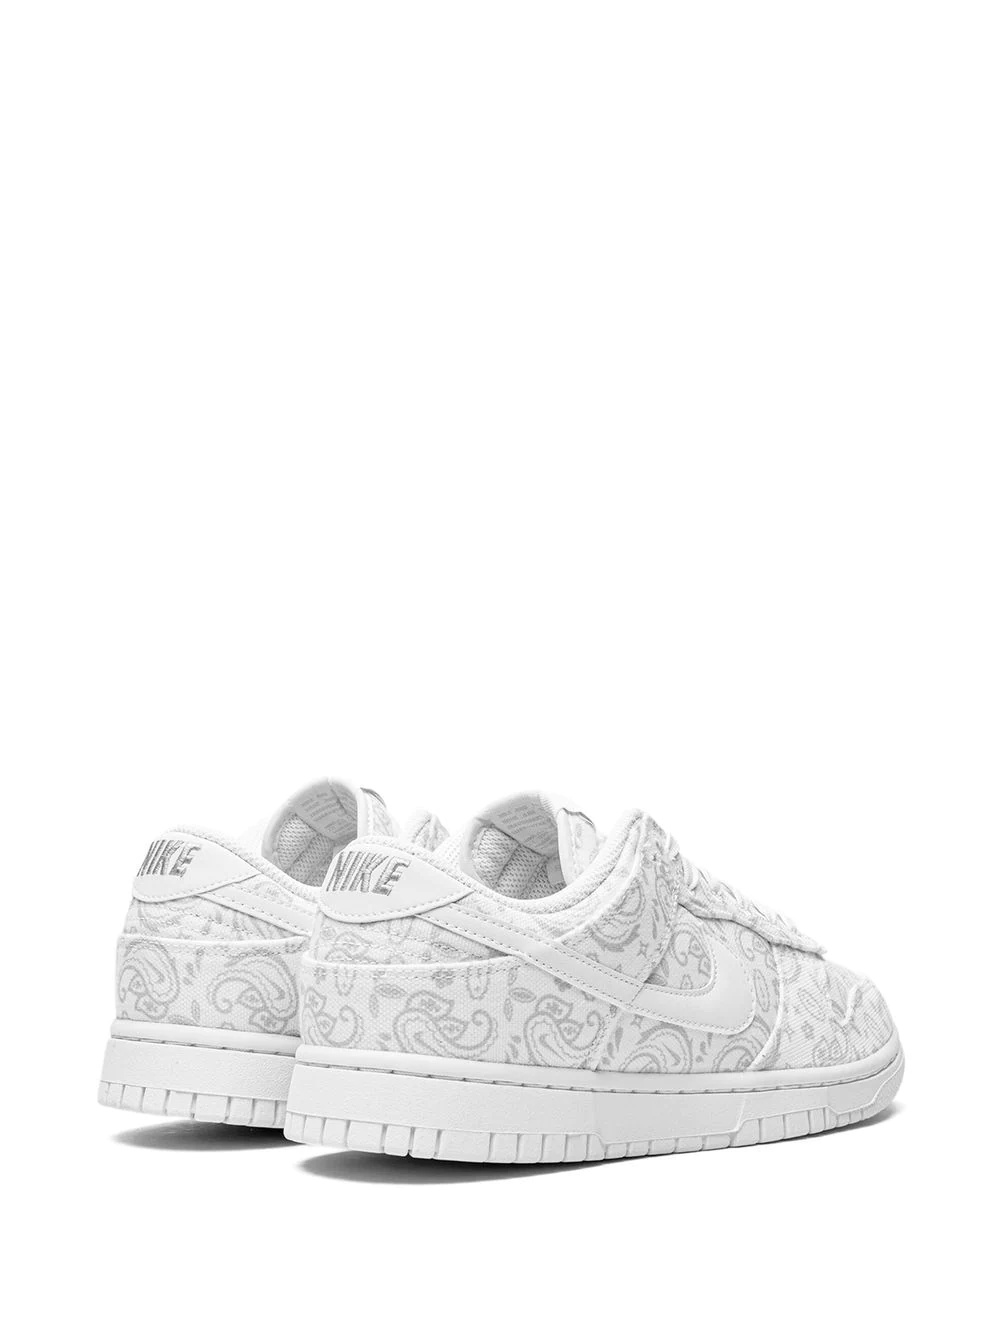 Dunk Low "White Paisley" sneakers - 3